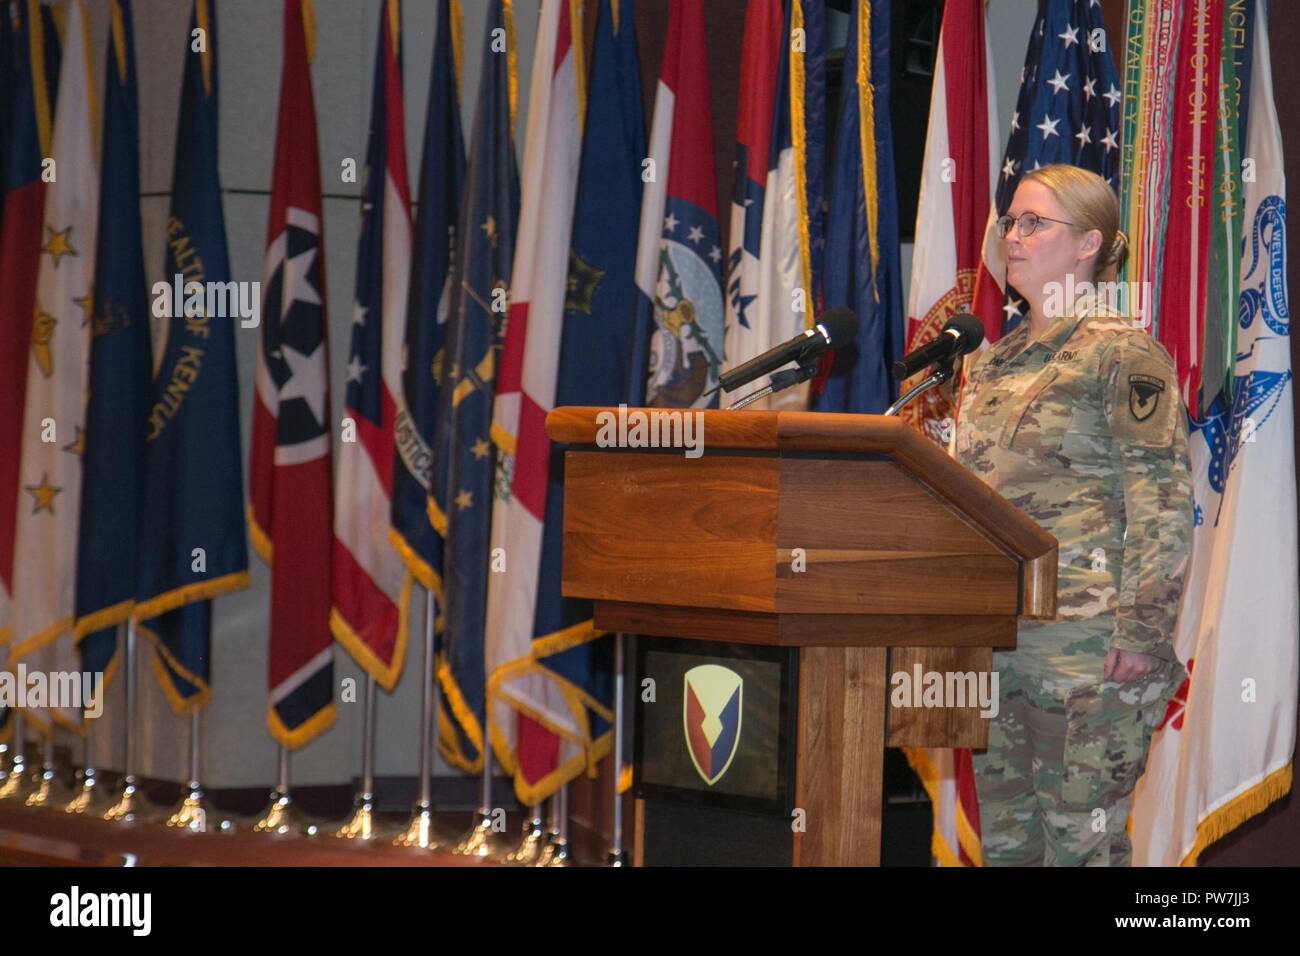 U.S. Army Sgt. Amy Mahoney, a member of the Army Materiel Command's Band, sings the National Anthem during the Hispanic-American Heritage Month Observance celebration Sept. 25, 2017 at Redstone Arsenal, Alabama. The guest speaker for the event was Christine Chavez, granddaughter of labor leader and civil rights activist Cesar Chavez. Stock Photo